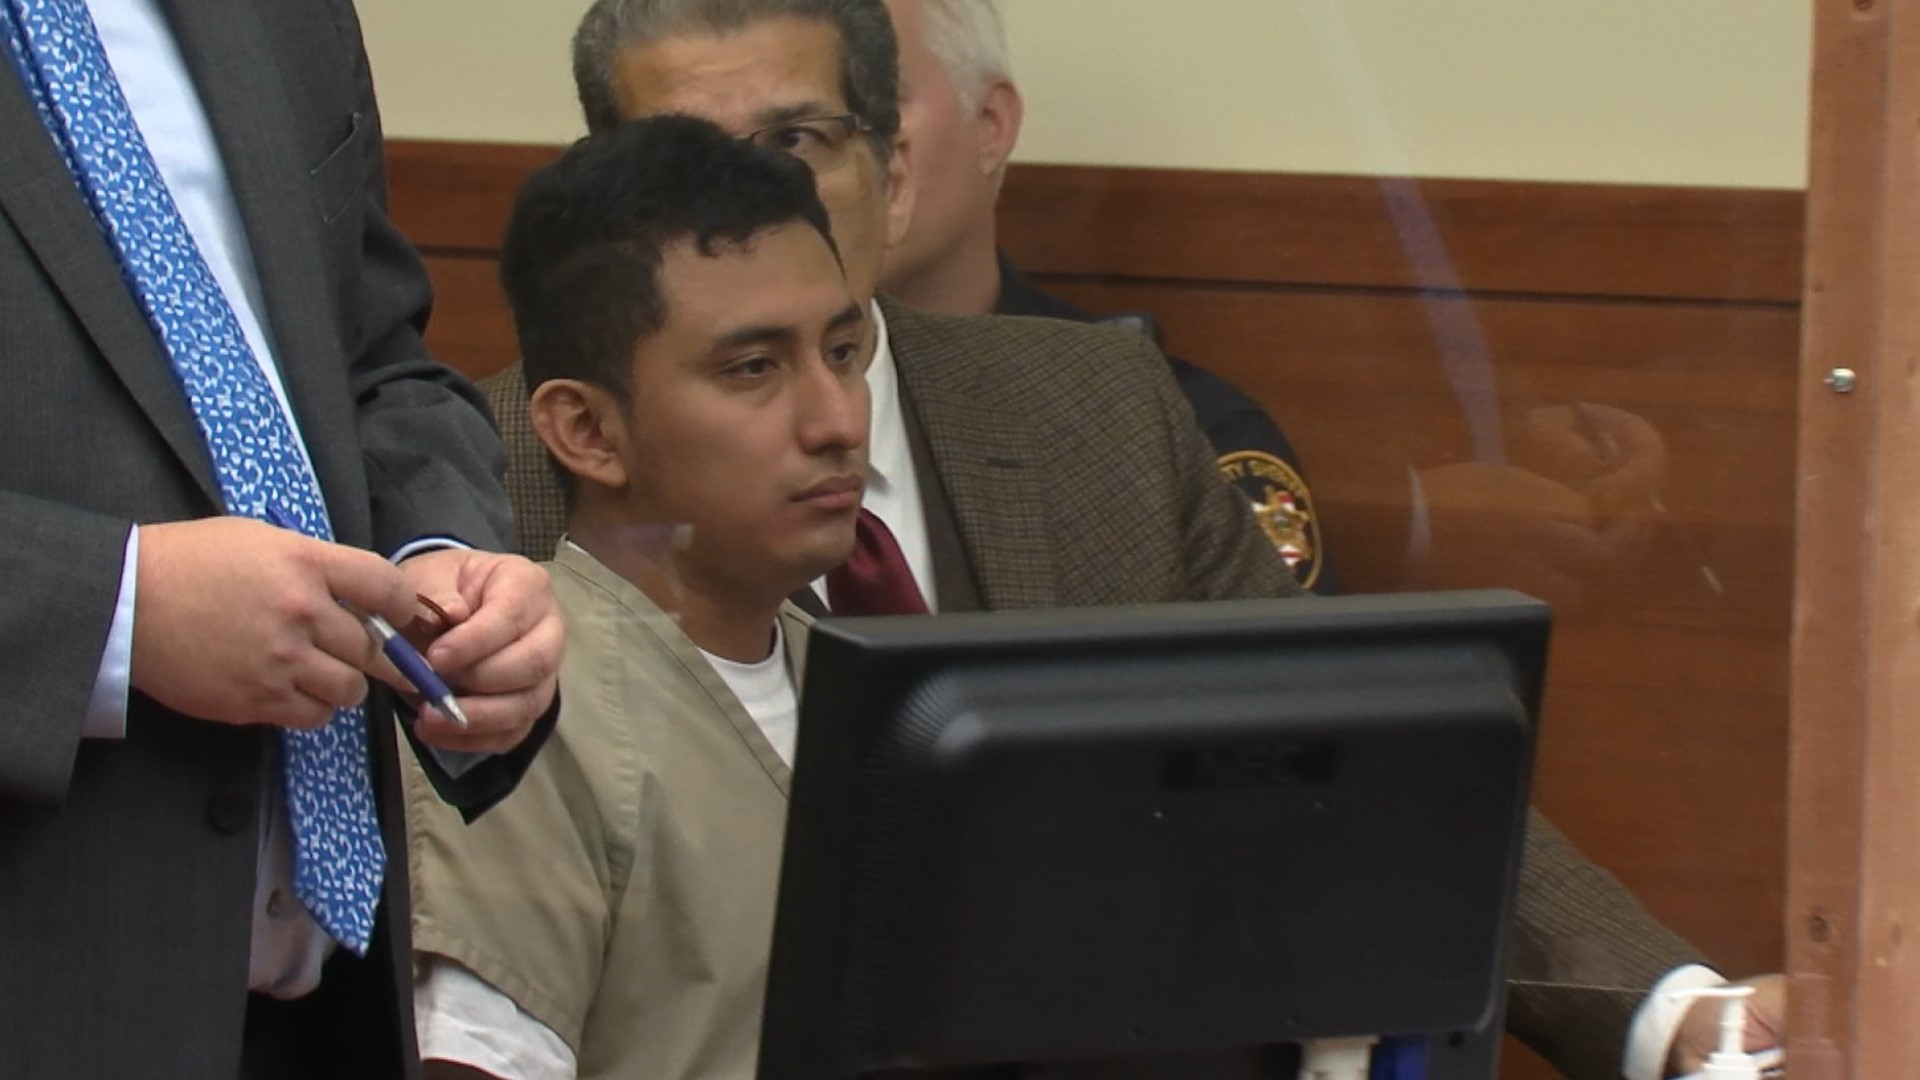 Gerson Fuentes appeared in Franklin County Court of Common Pleas Wednesday afternoon where he entered a plea agreement.